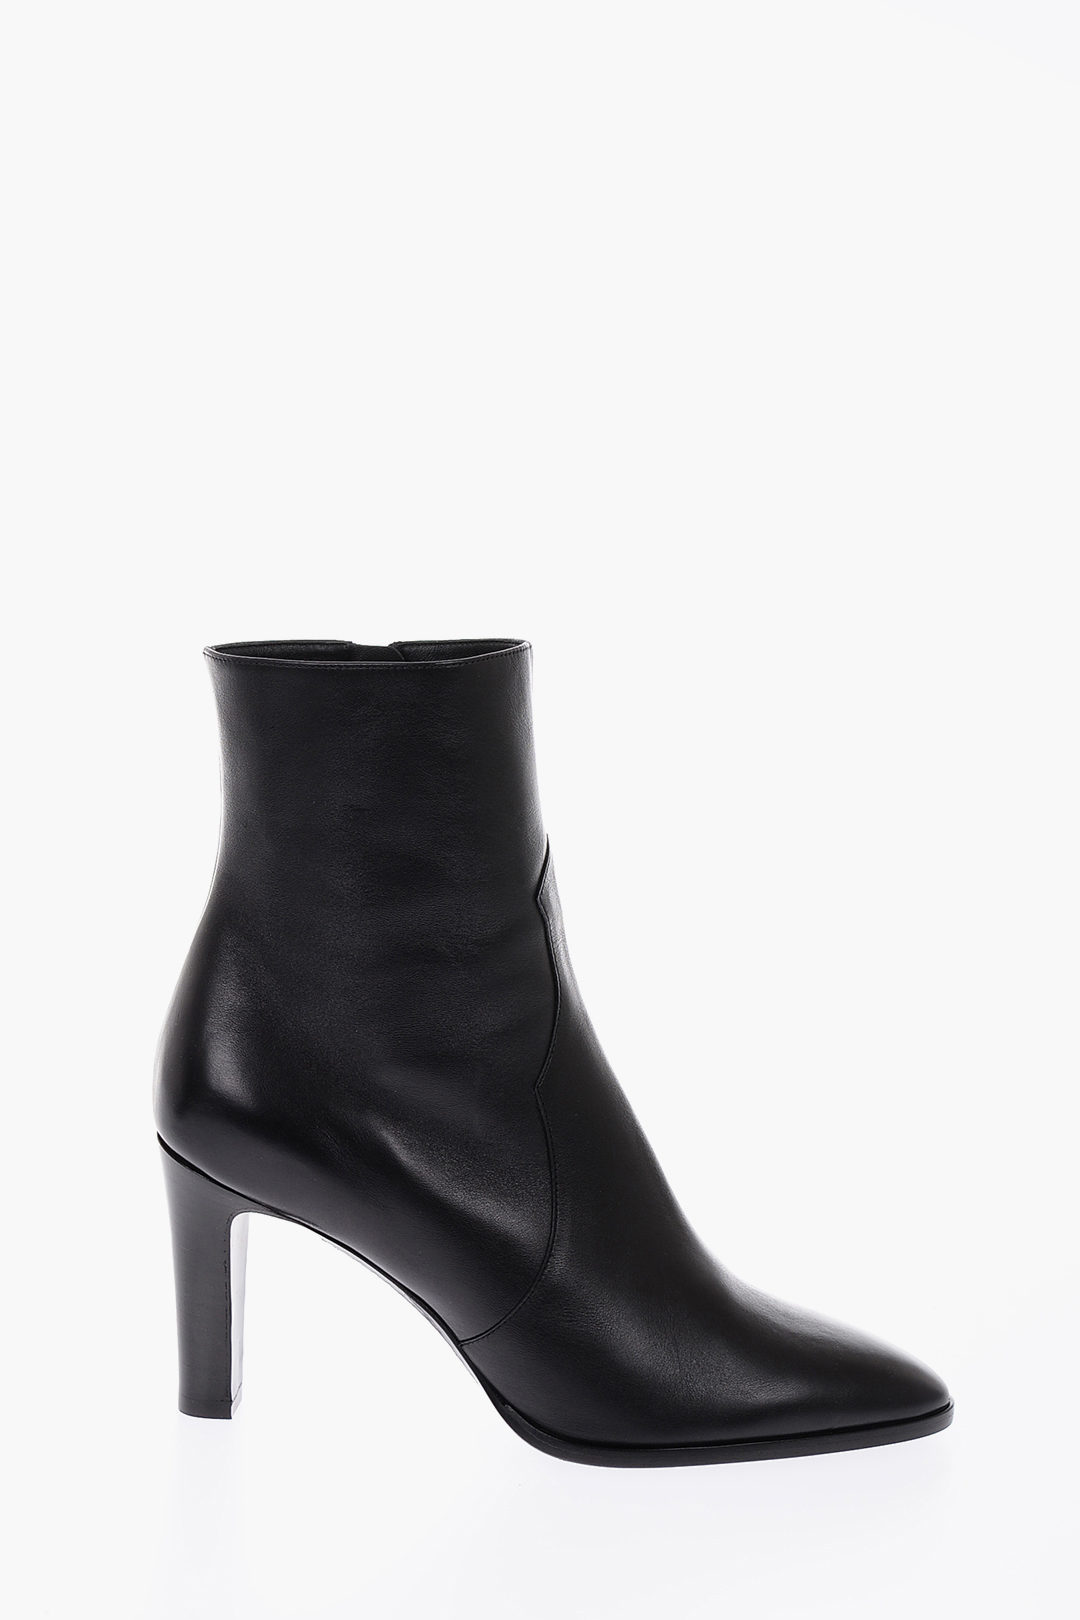 Celine 8.5cm leather CLAUDE Almond Toe Booties women - Glamood Outlet